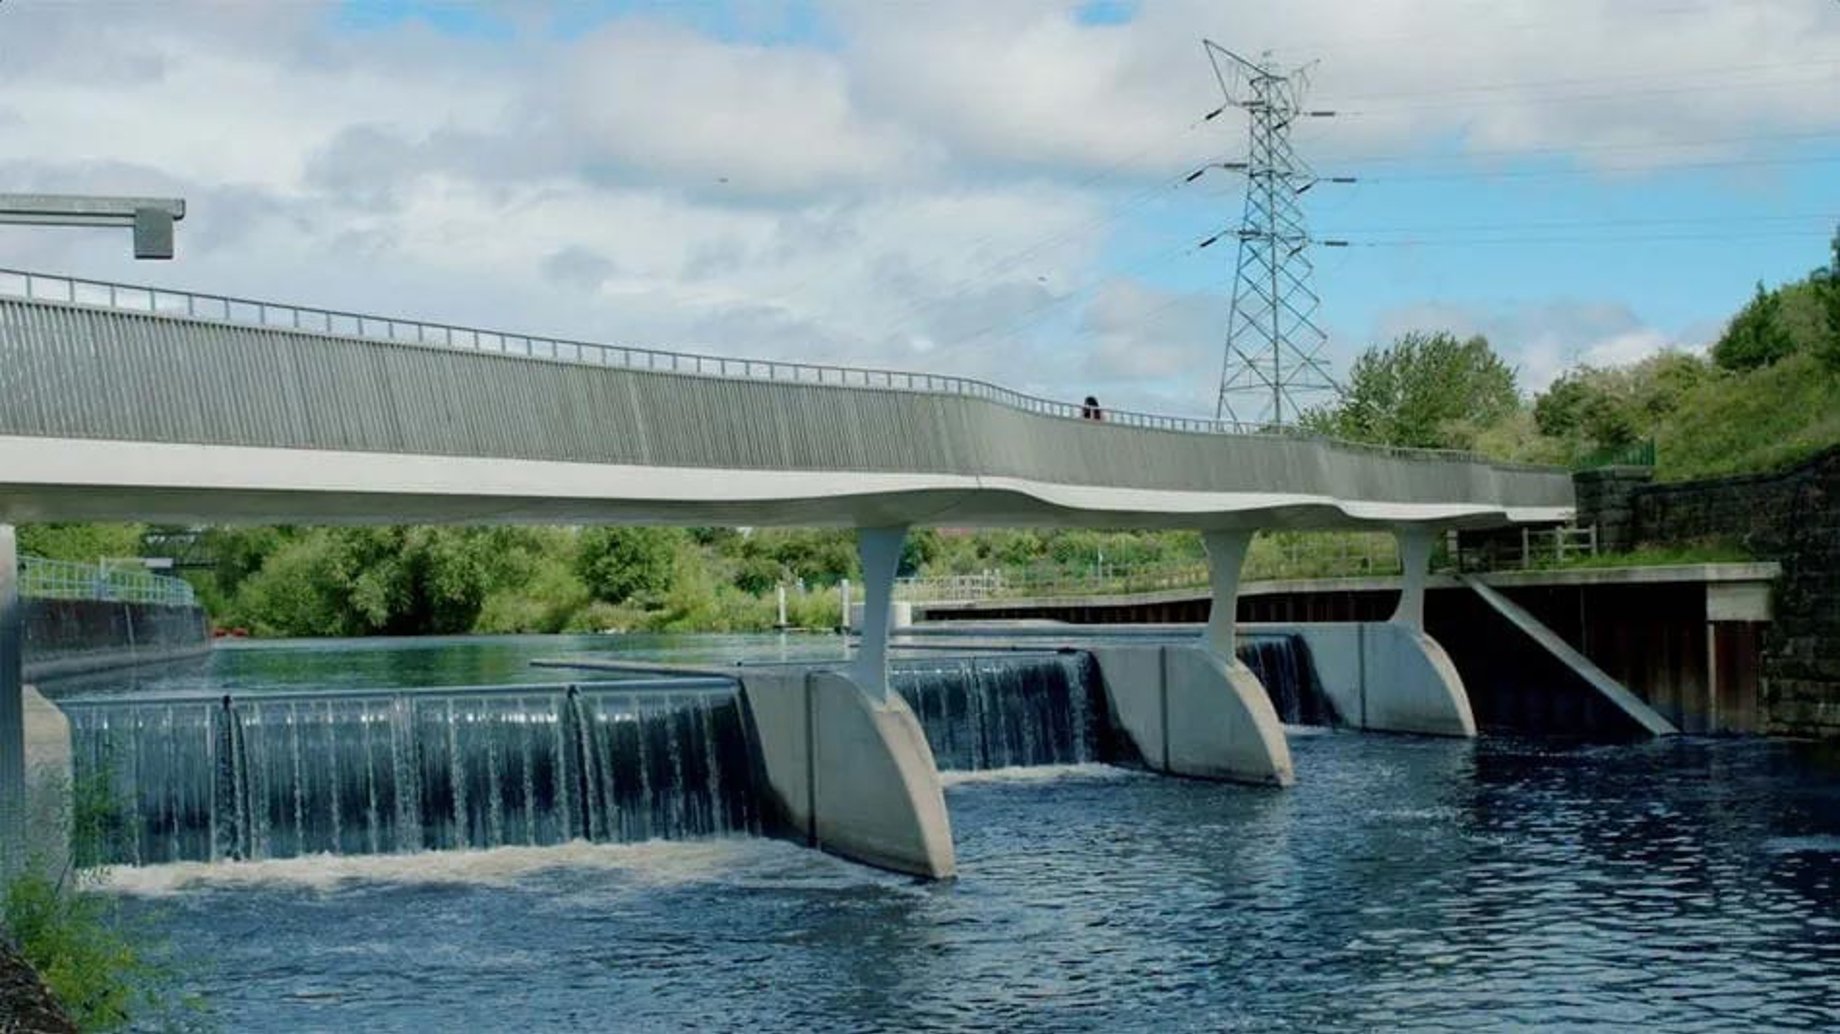 The framework marks a significant milestone in Thames Water’s commitment to ensuring sustainable water resource management for the future. Image © This is Engineering